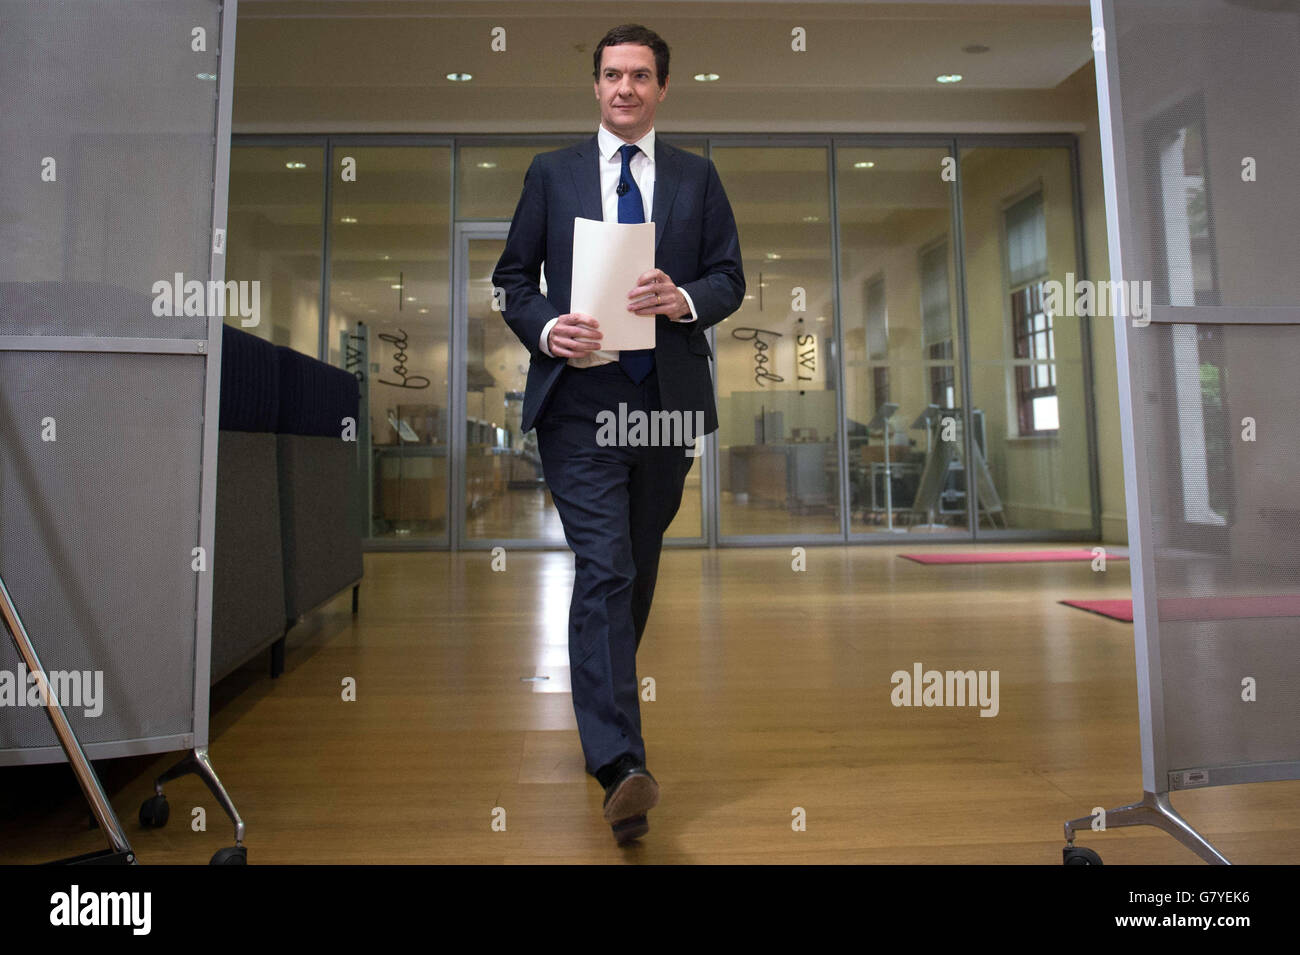 Chancellor George Osborne arrives for a press conference at The Treasury, London, where he moved to try to calm market turmoil triggered by the pro-Brexit vote. Stock Photo